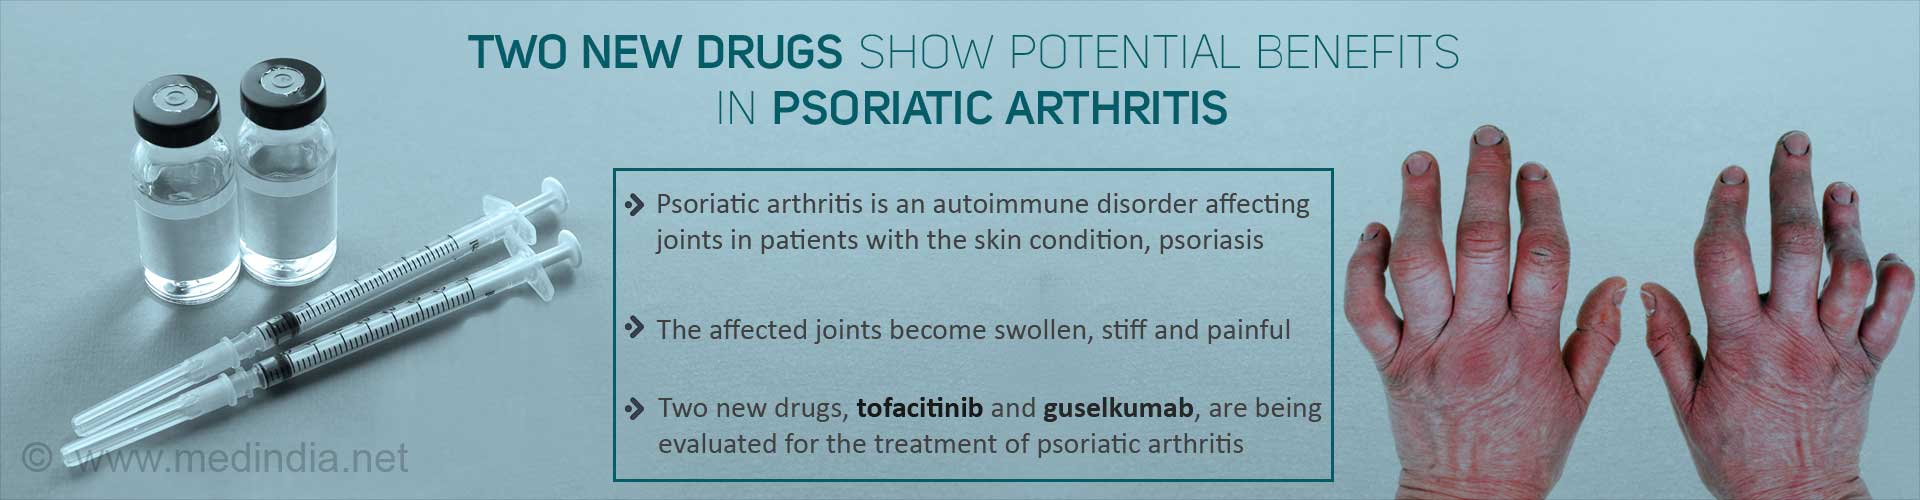 Two new drugs show potential benefits in psoriatic arthritis
- Psoriatic arthritis is an autoimmune disorder affecting joints in patients with the skin condition, psoriasis
- The affected joints become swollen, stiff ans painful
- Two new drugs, tofacitinib and guselkumab, are being evaluated for the treatment of psoriatic arthritis